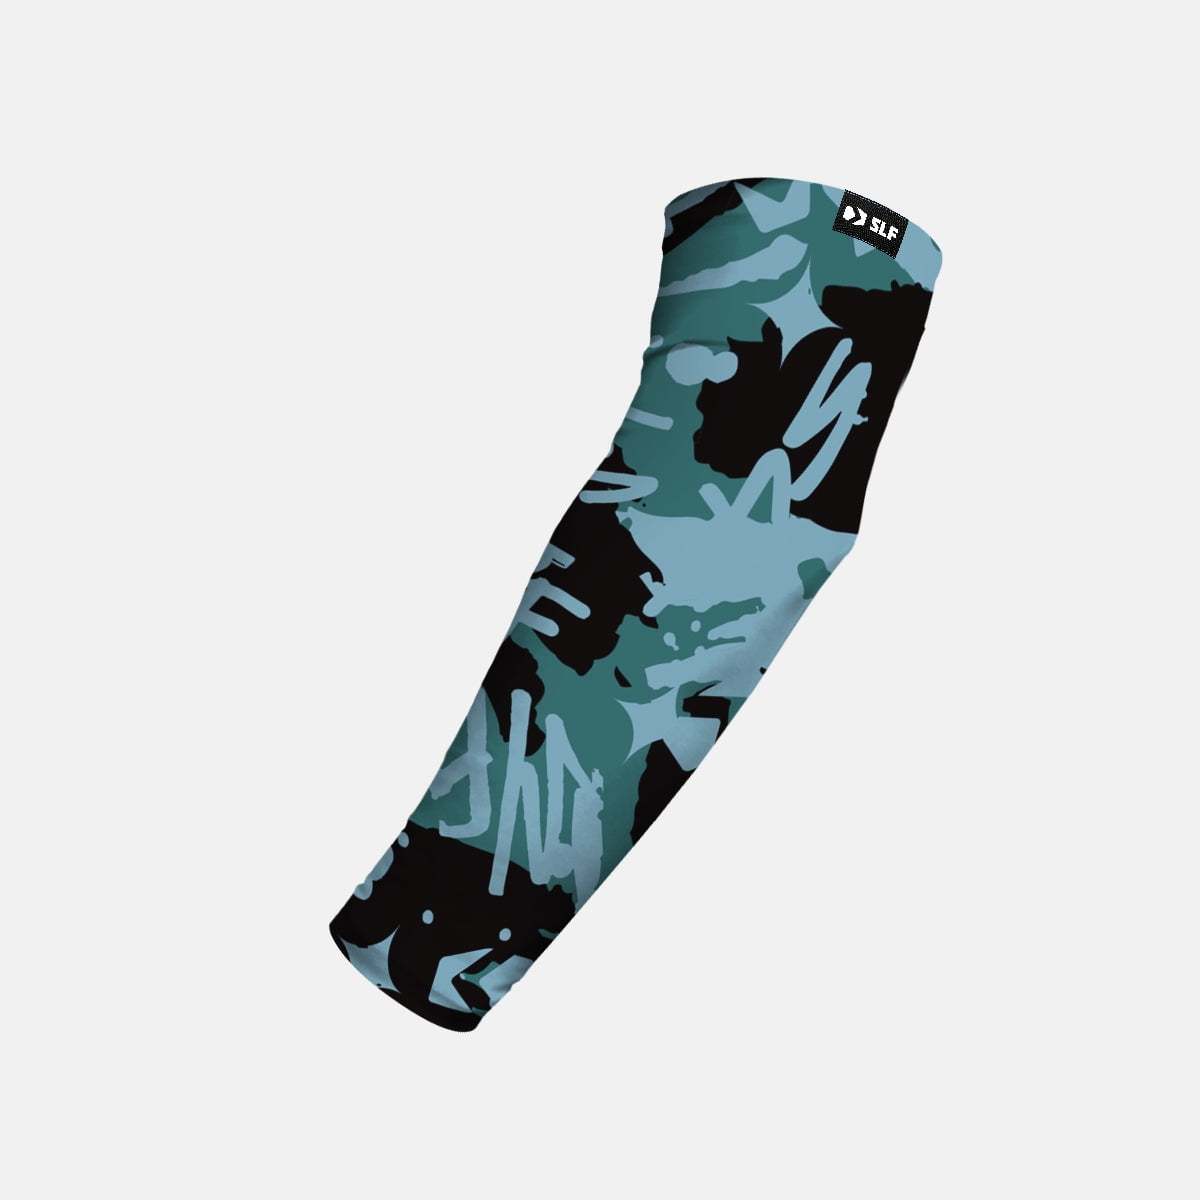 AXBXCX 1Pairs Camouflage Camo Print Arm Sleeves Cool for Sports Outdoor Activities 